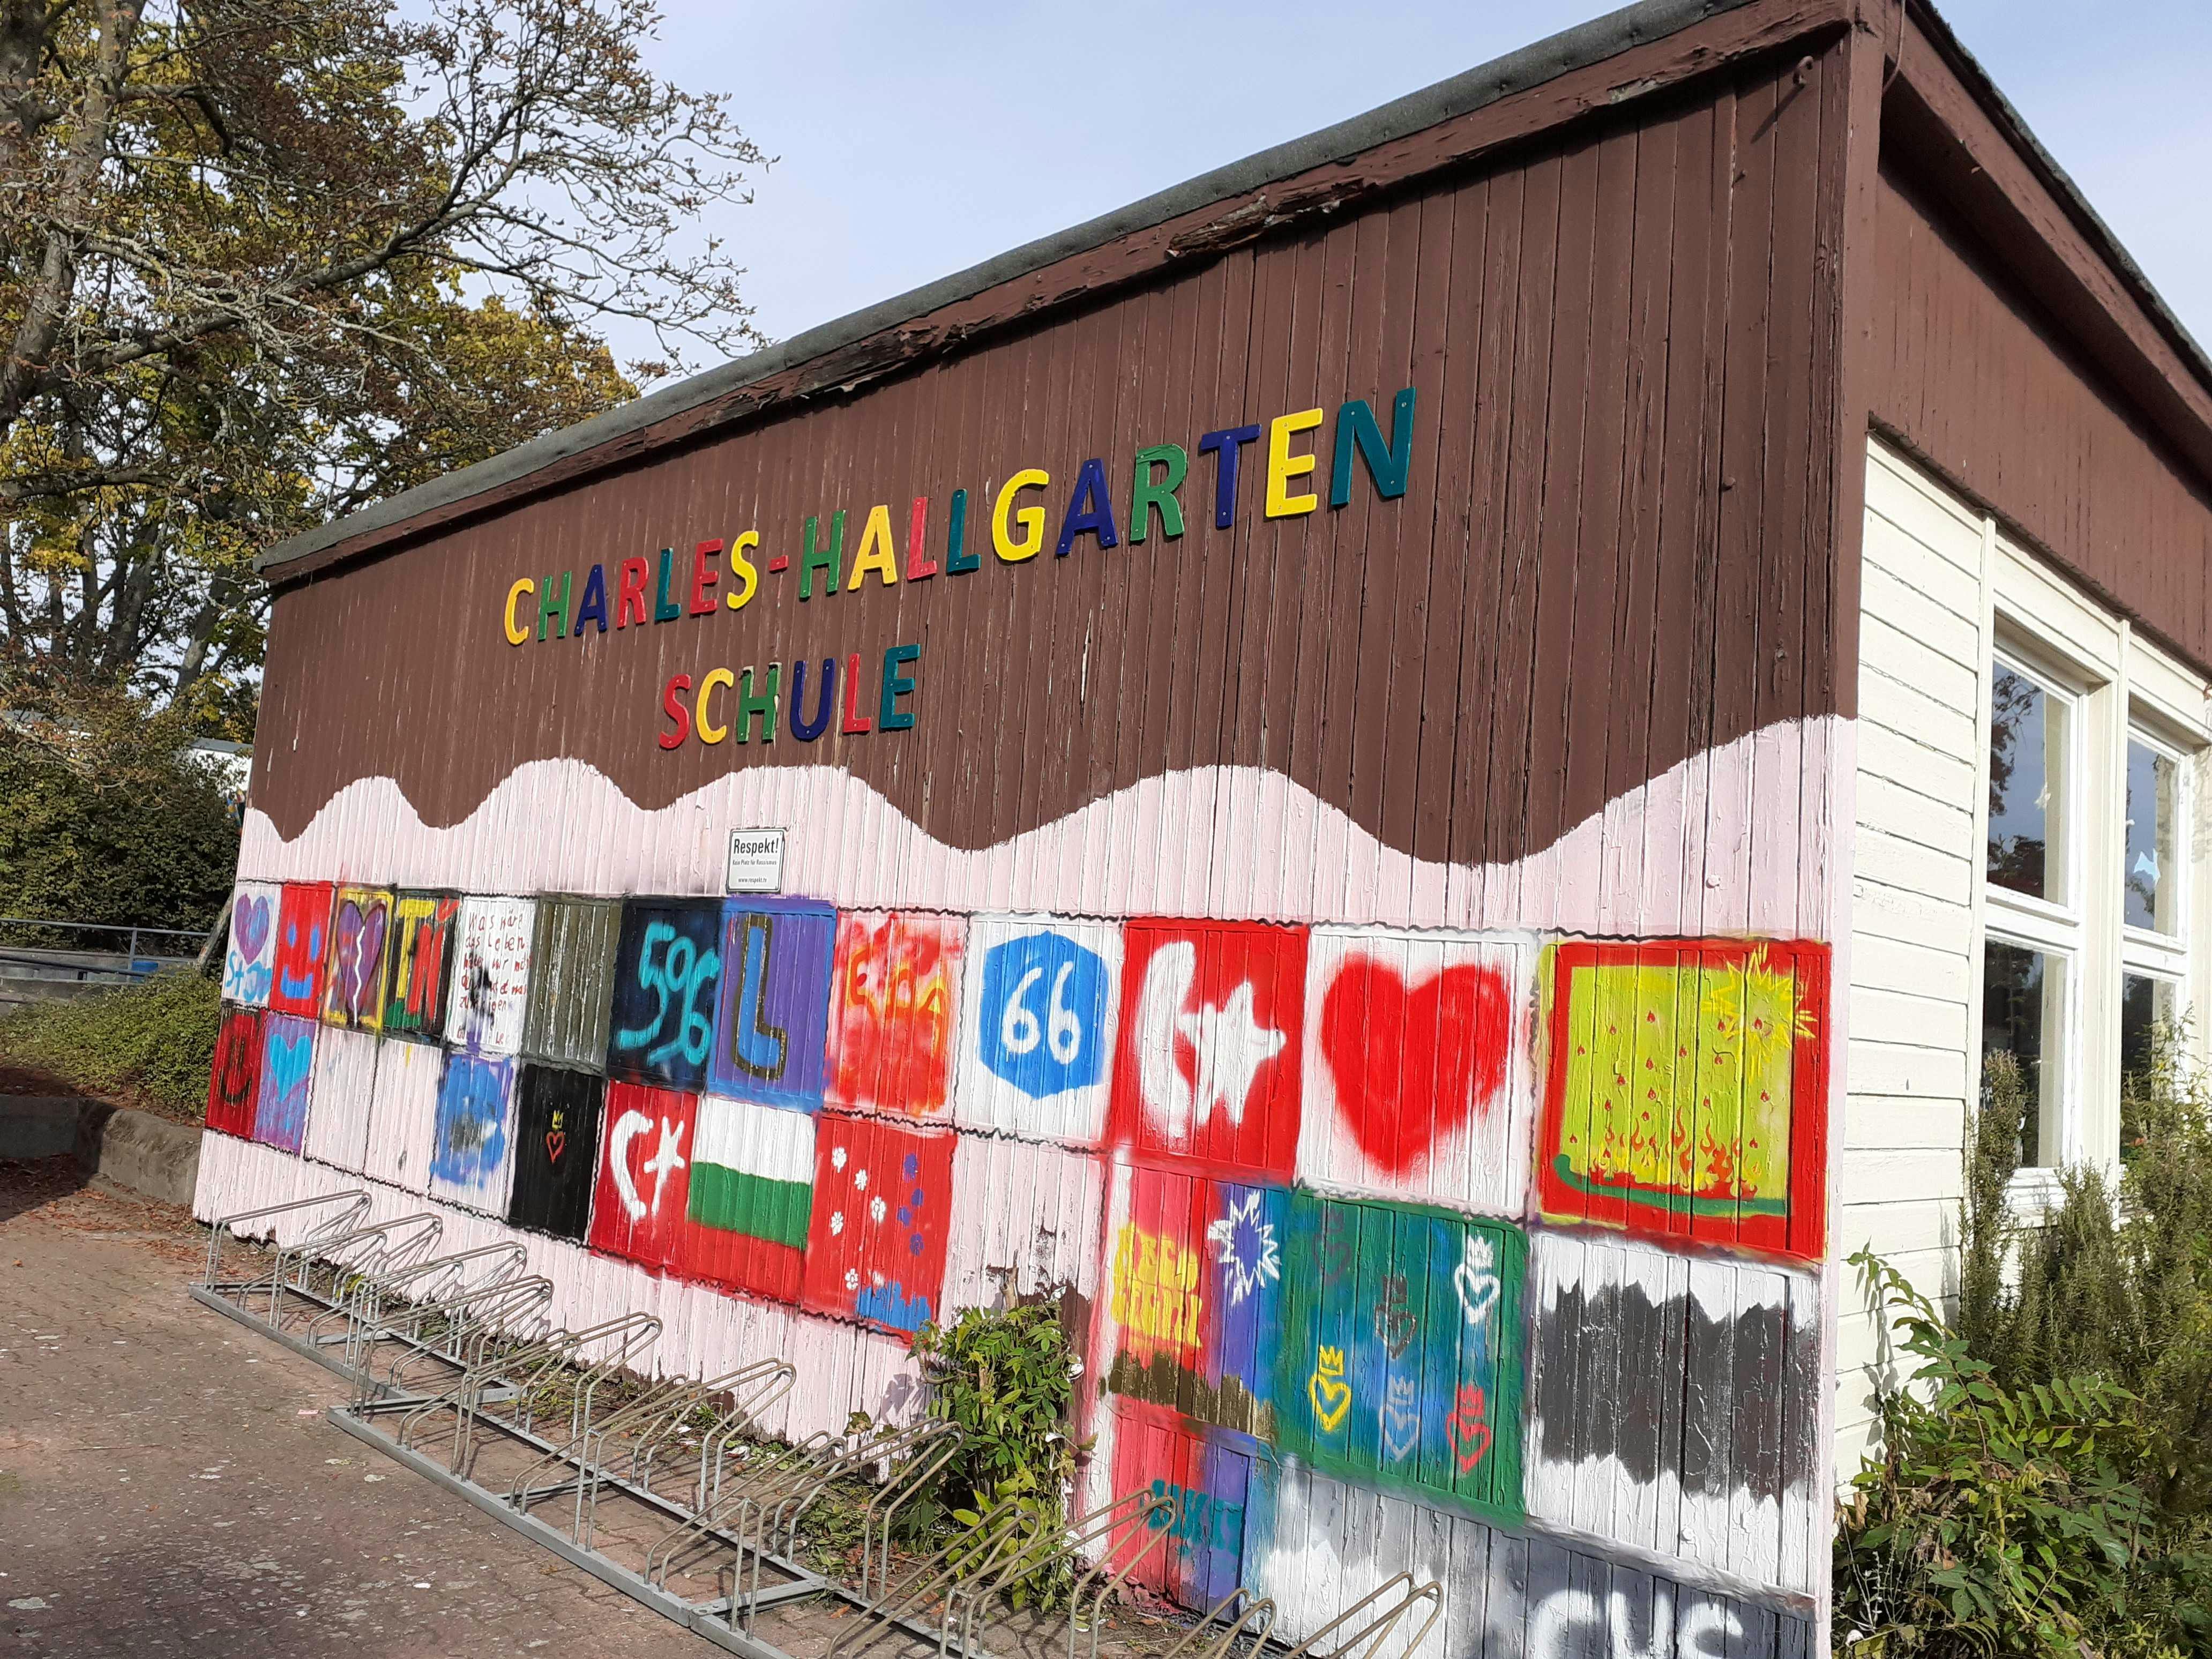 On the photo one can see a wall of the Charles Hallgarten School with many small graffiti pictures on it. Some show hearts or stars, for example.